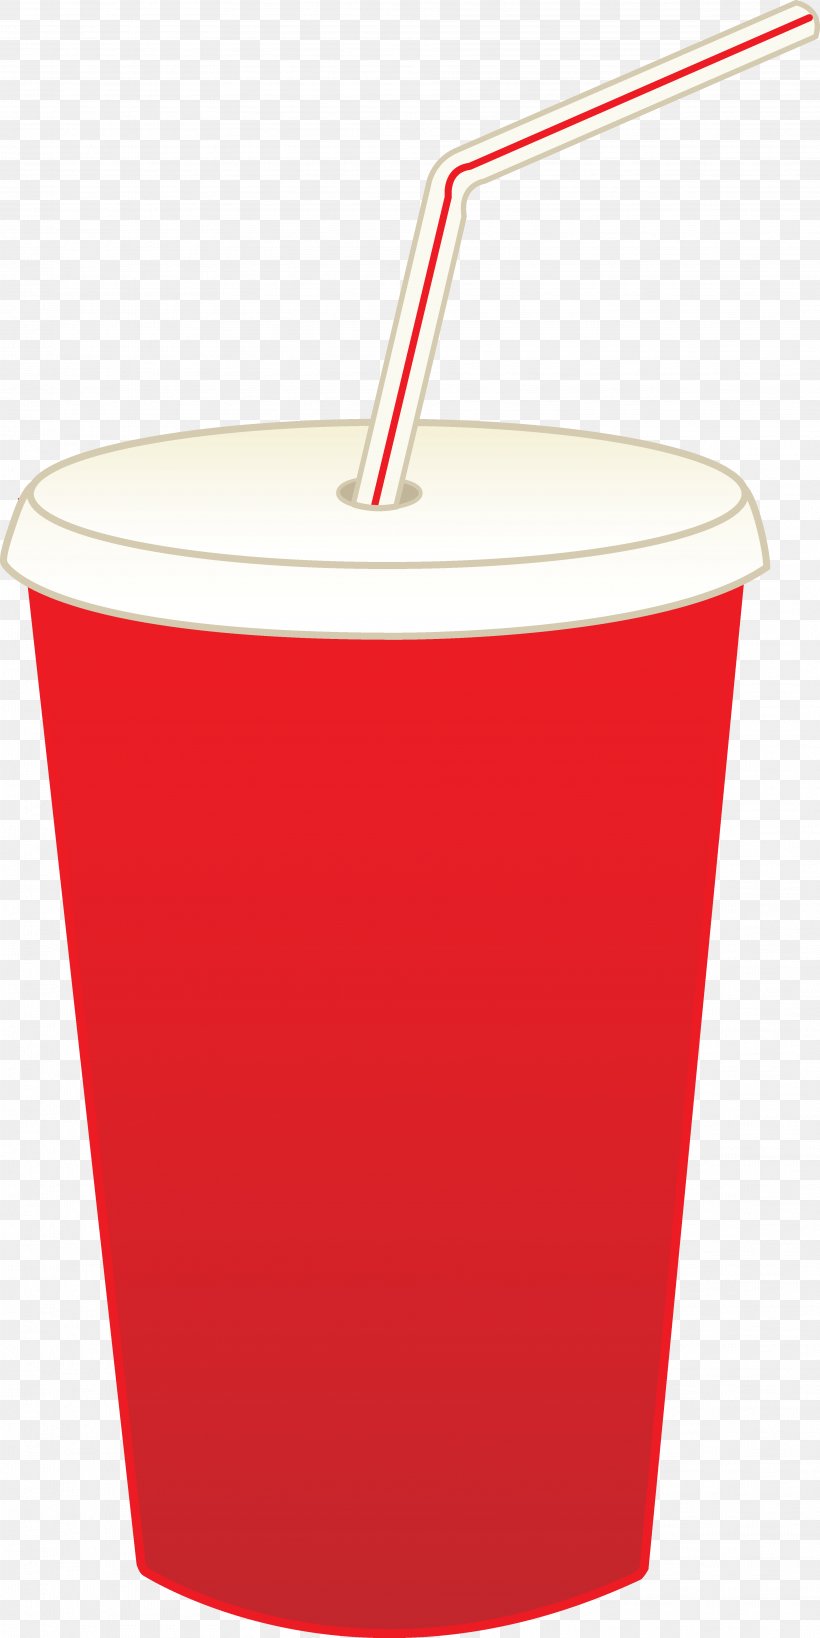 Soft Drink Coca-Cola Fast Food Clip Art, PNG, 3832x7657px, Soft Drink, Beverage Can, Bitmap, Cocacola, Cola Download Free